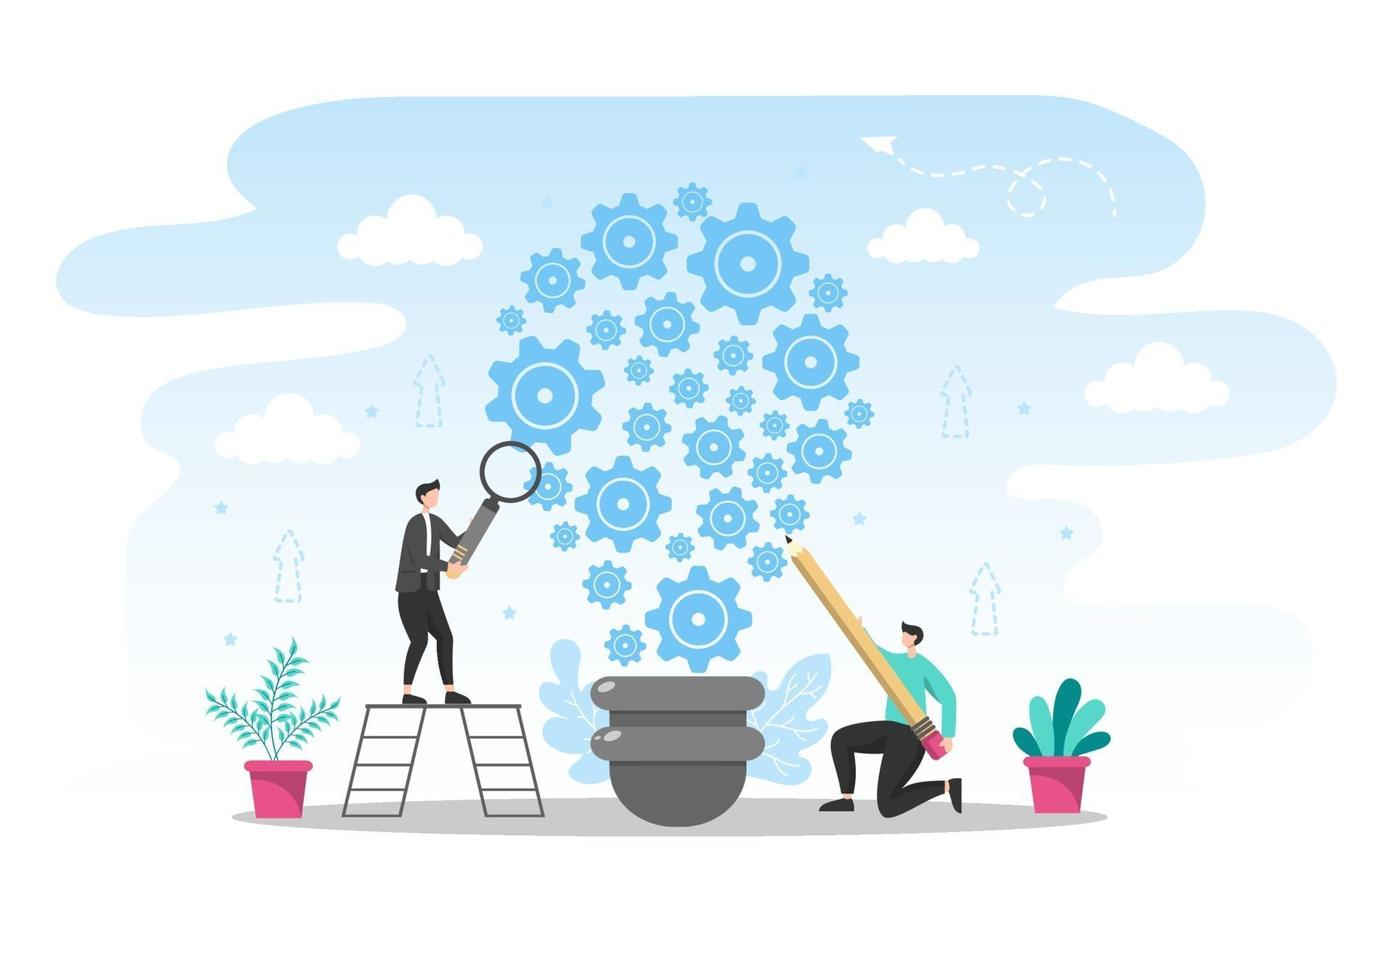 Startup Flat Illustration of Business Development Process, Innovation Product, and Creative Idea. vector